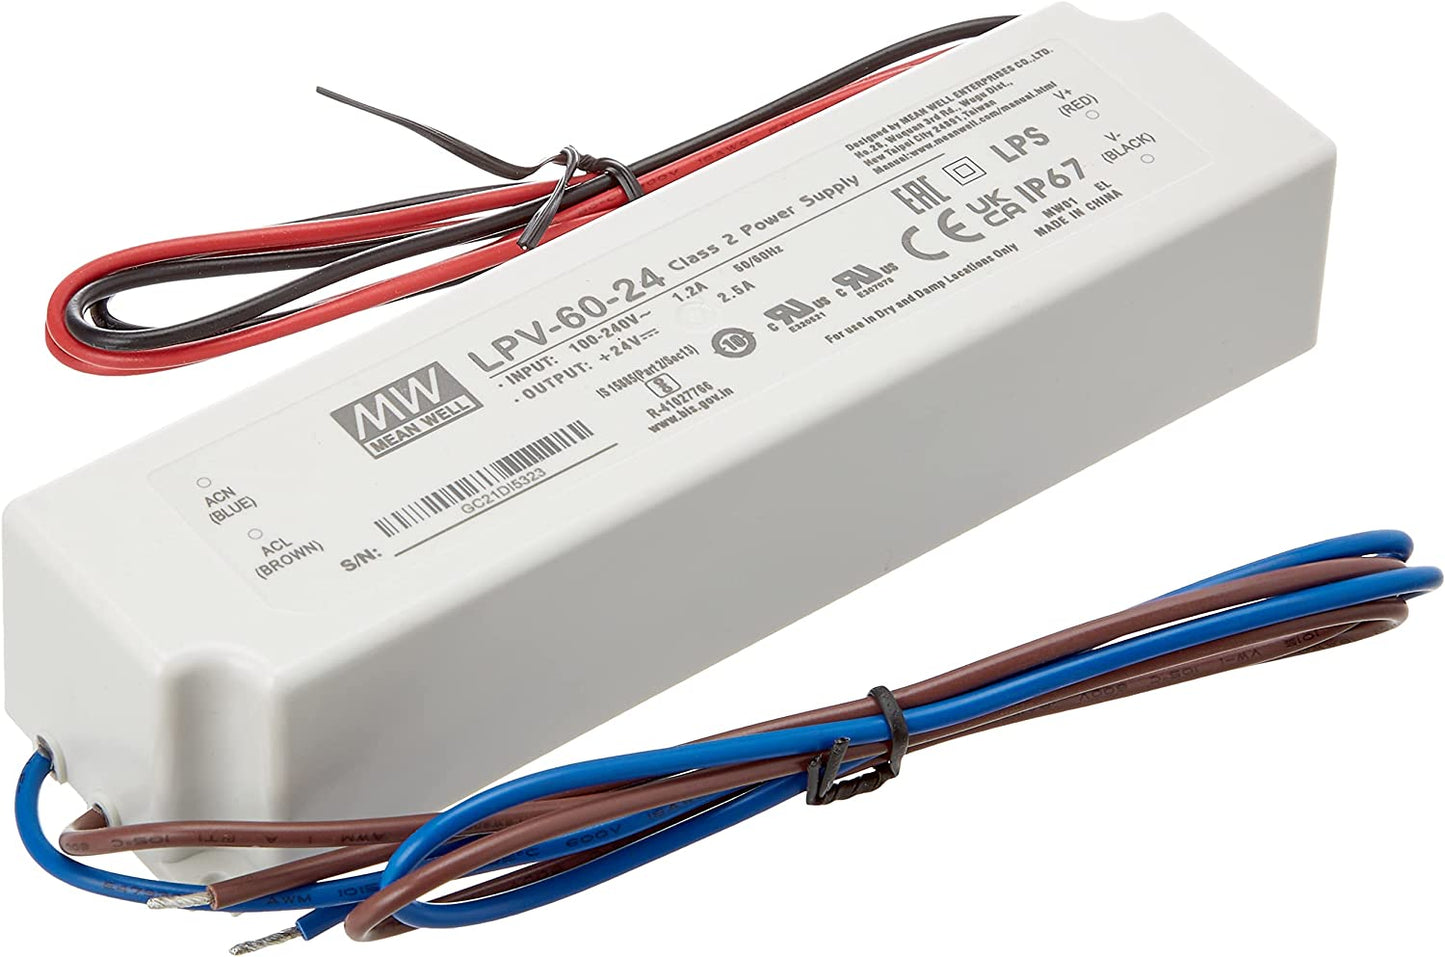 Meanwell LPV-60-24V 2.5A Constant Voltage Power Supply